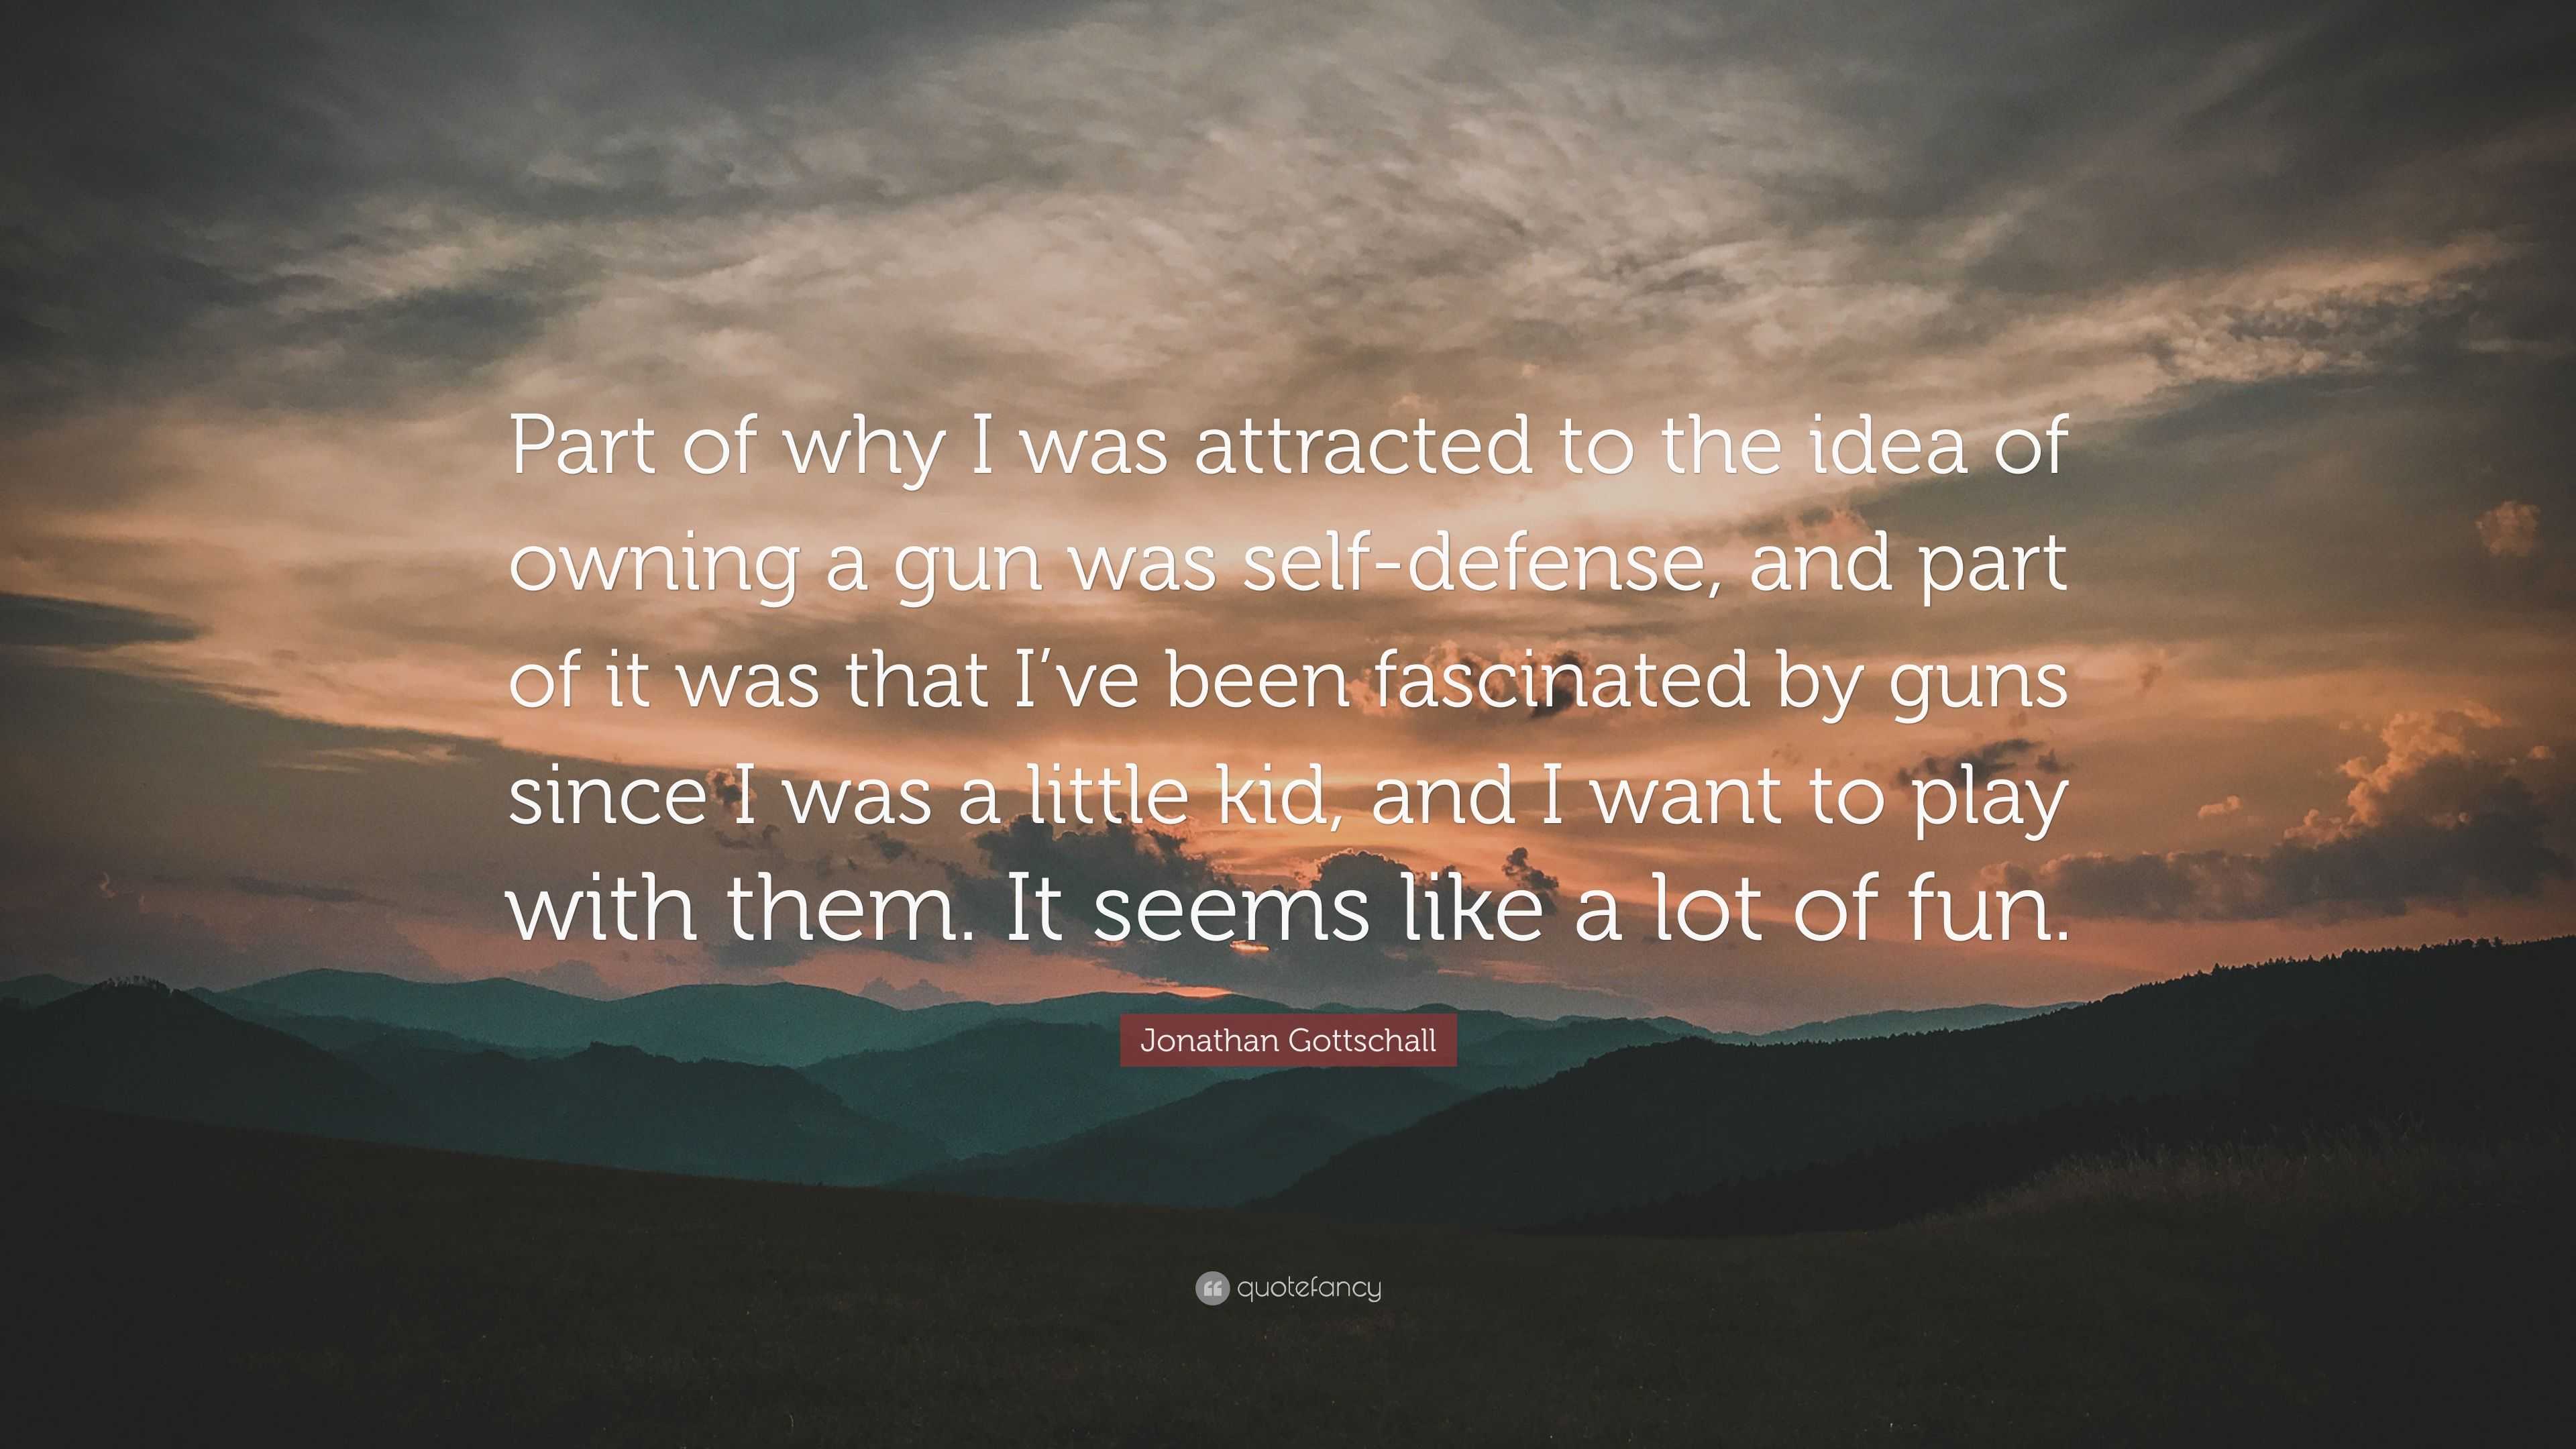 Jonathan Gottschall Quote Part Of Why I Was Attracted To The Idea Of Owning A Gun Was Self Defense And Part Of It Was That I Ve Been Fascinated B